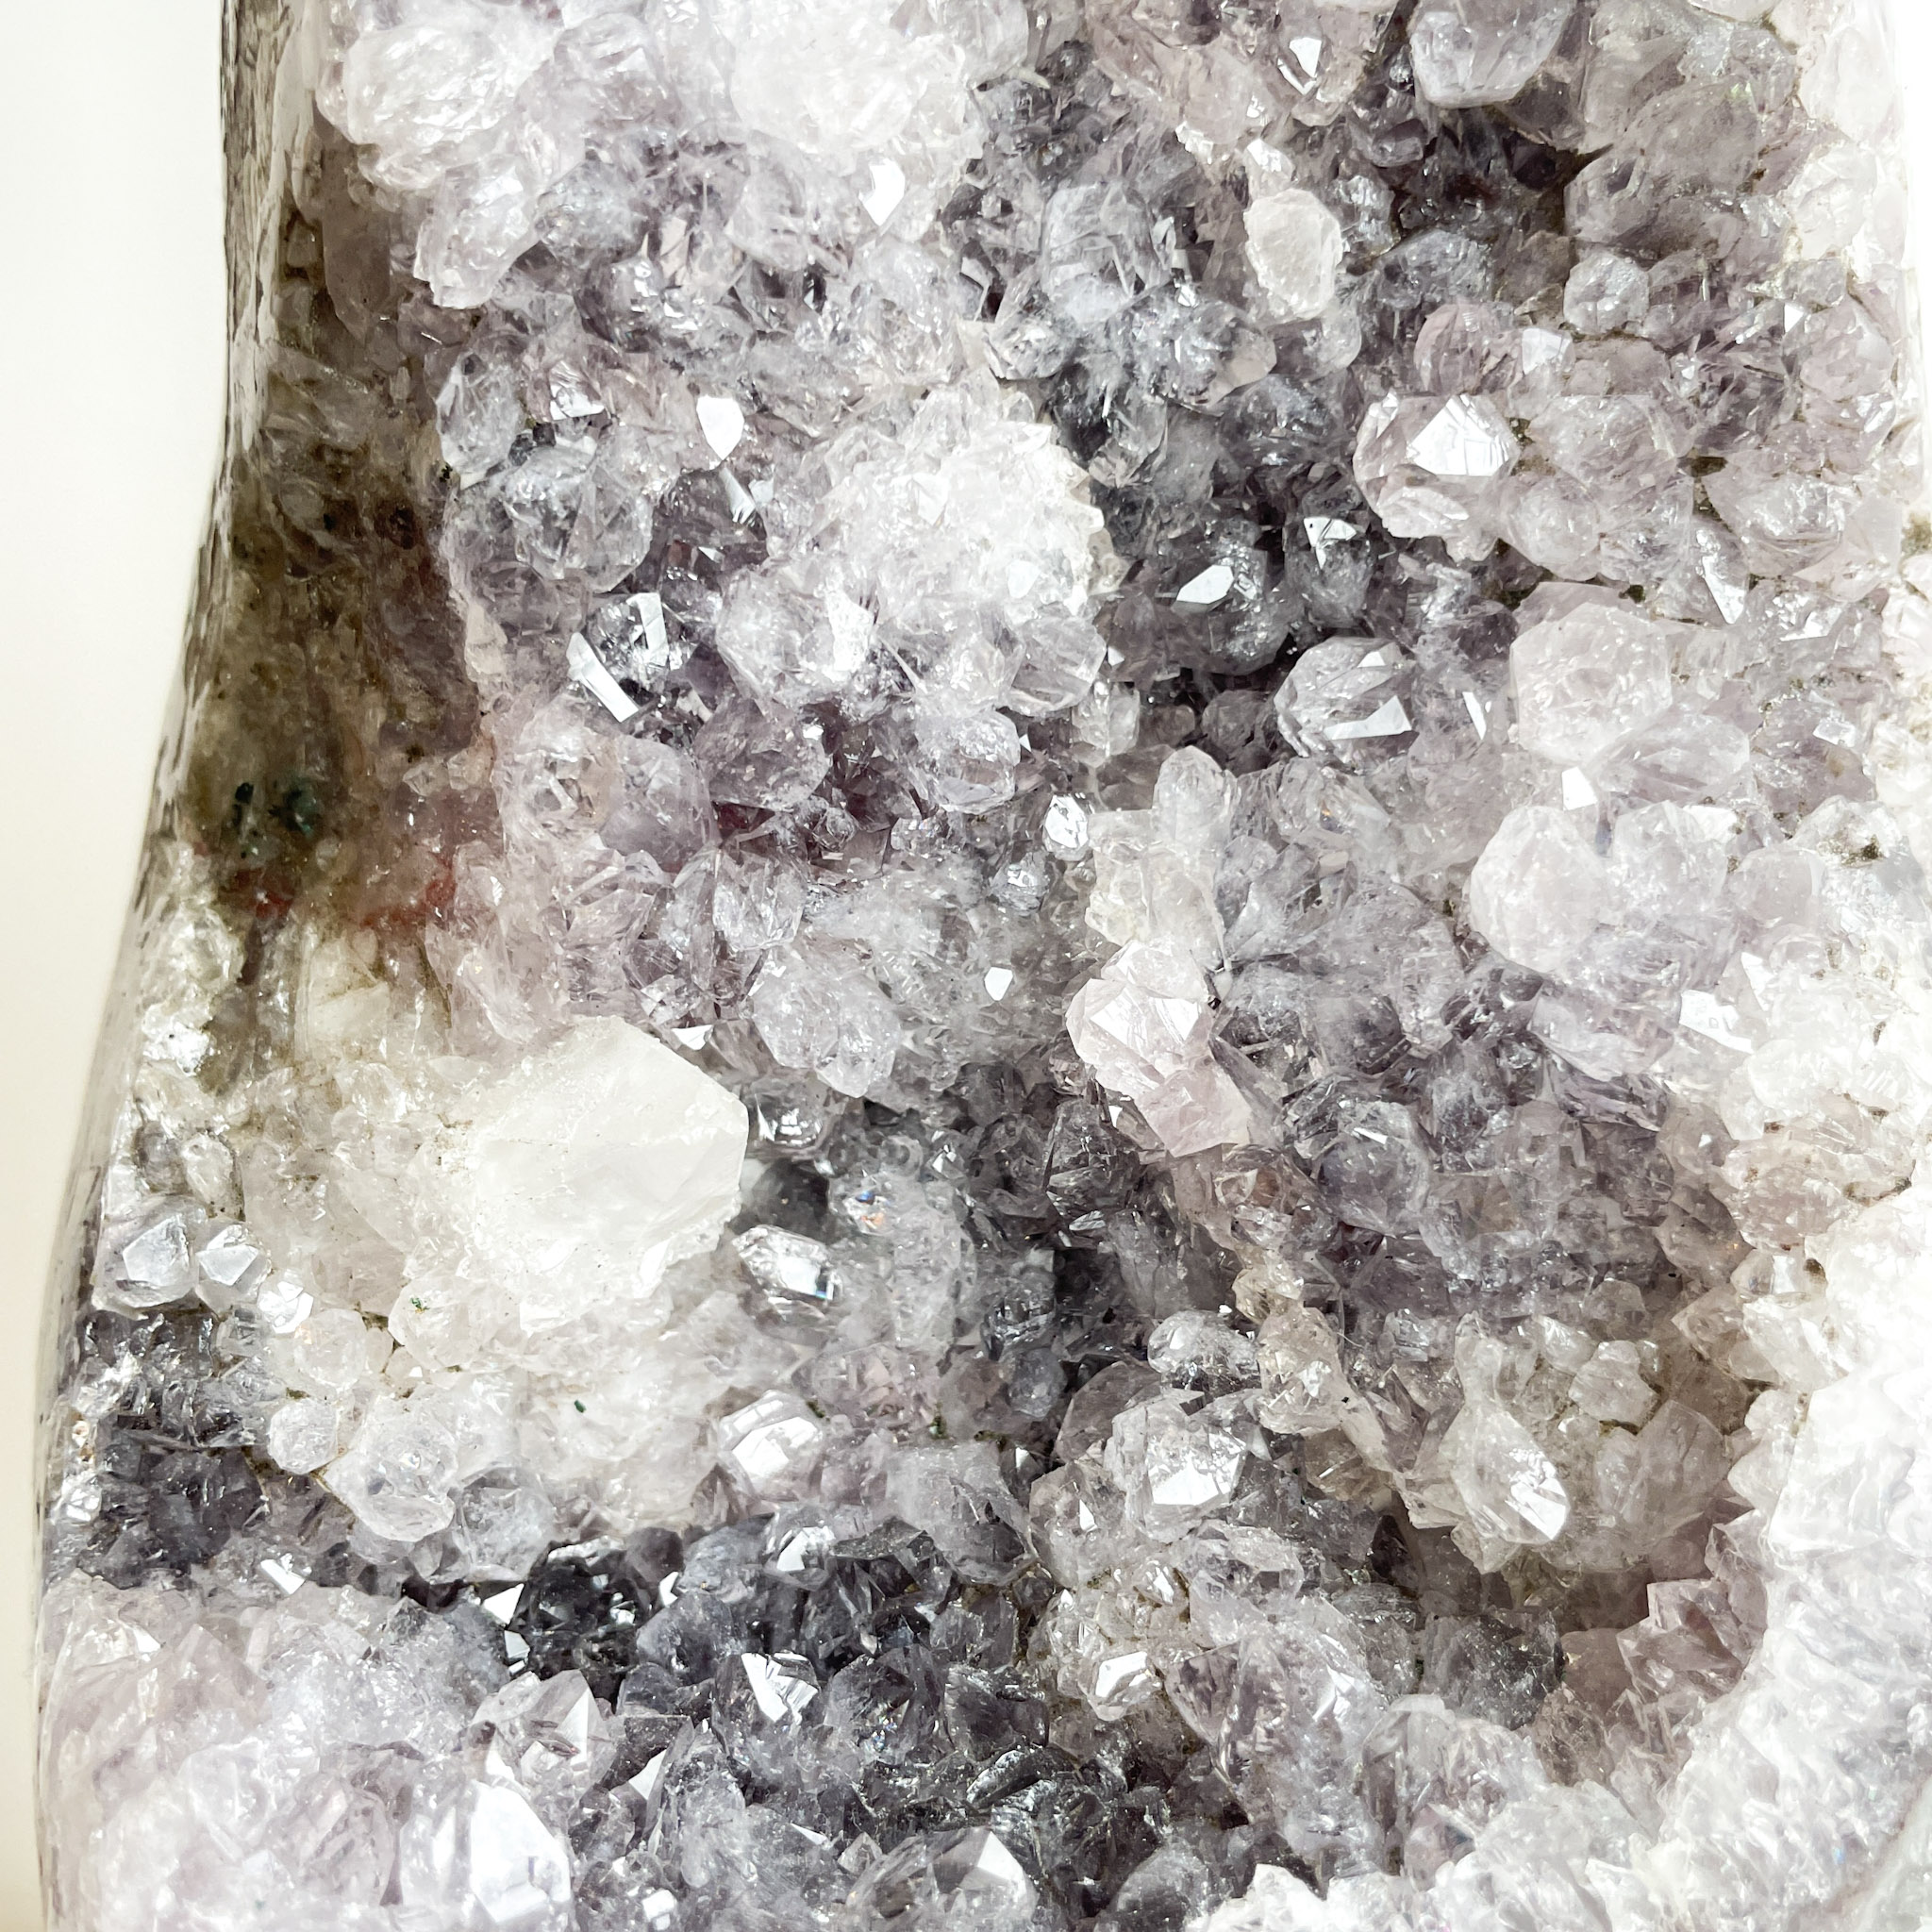 A close-up view of an agate geode, showcasing a variety of sparkling crystals ranging from translucent to shades of grey and white.